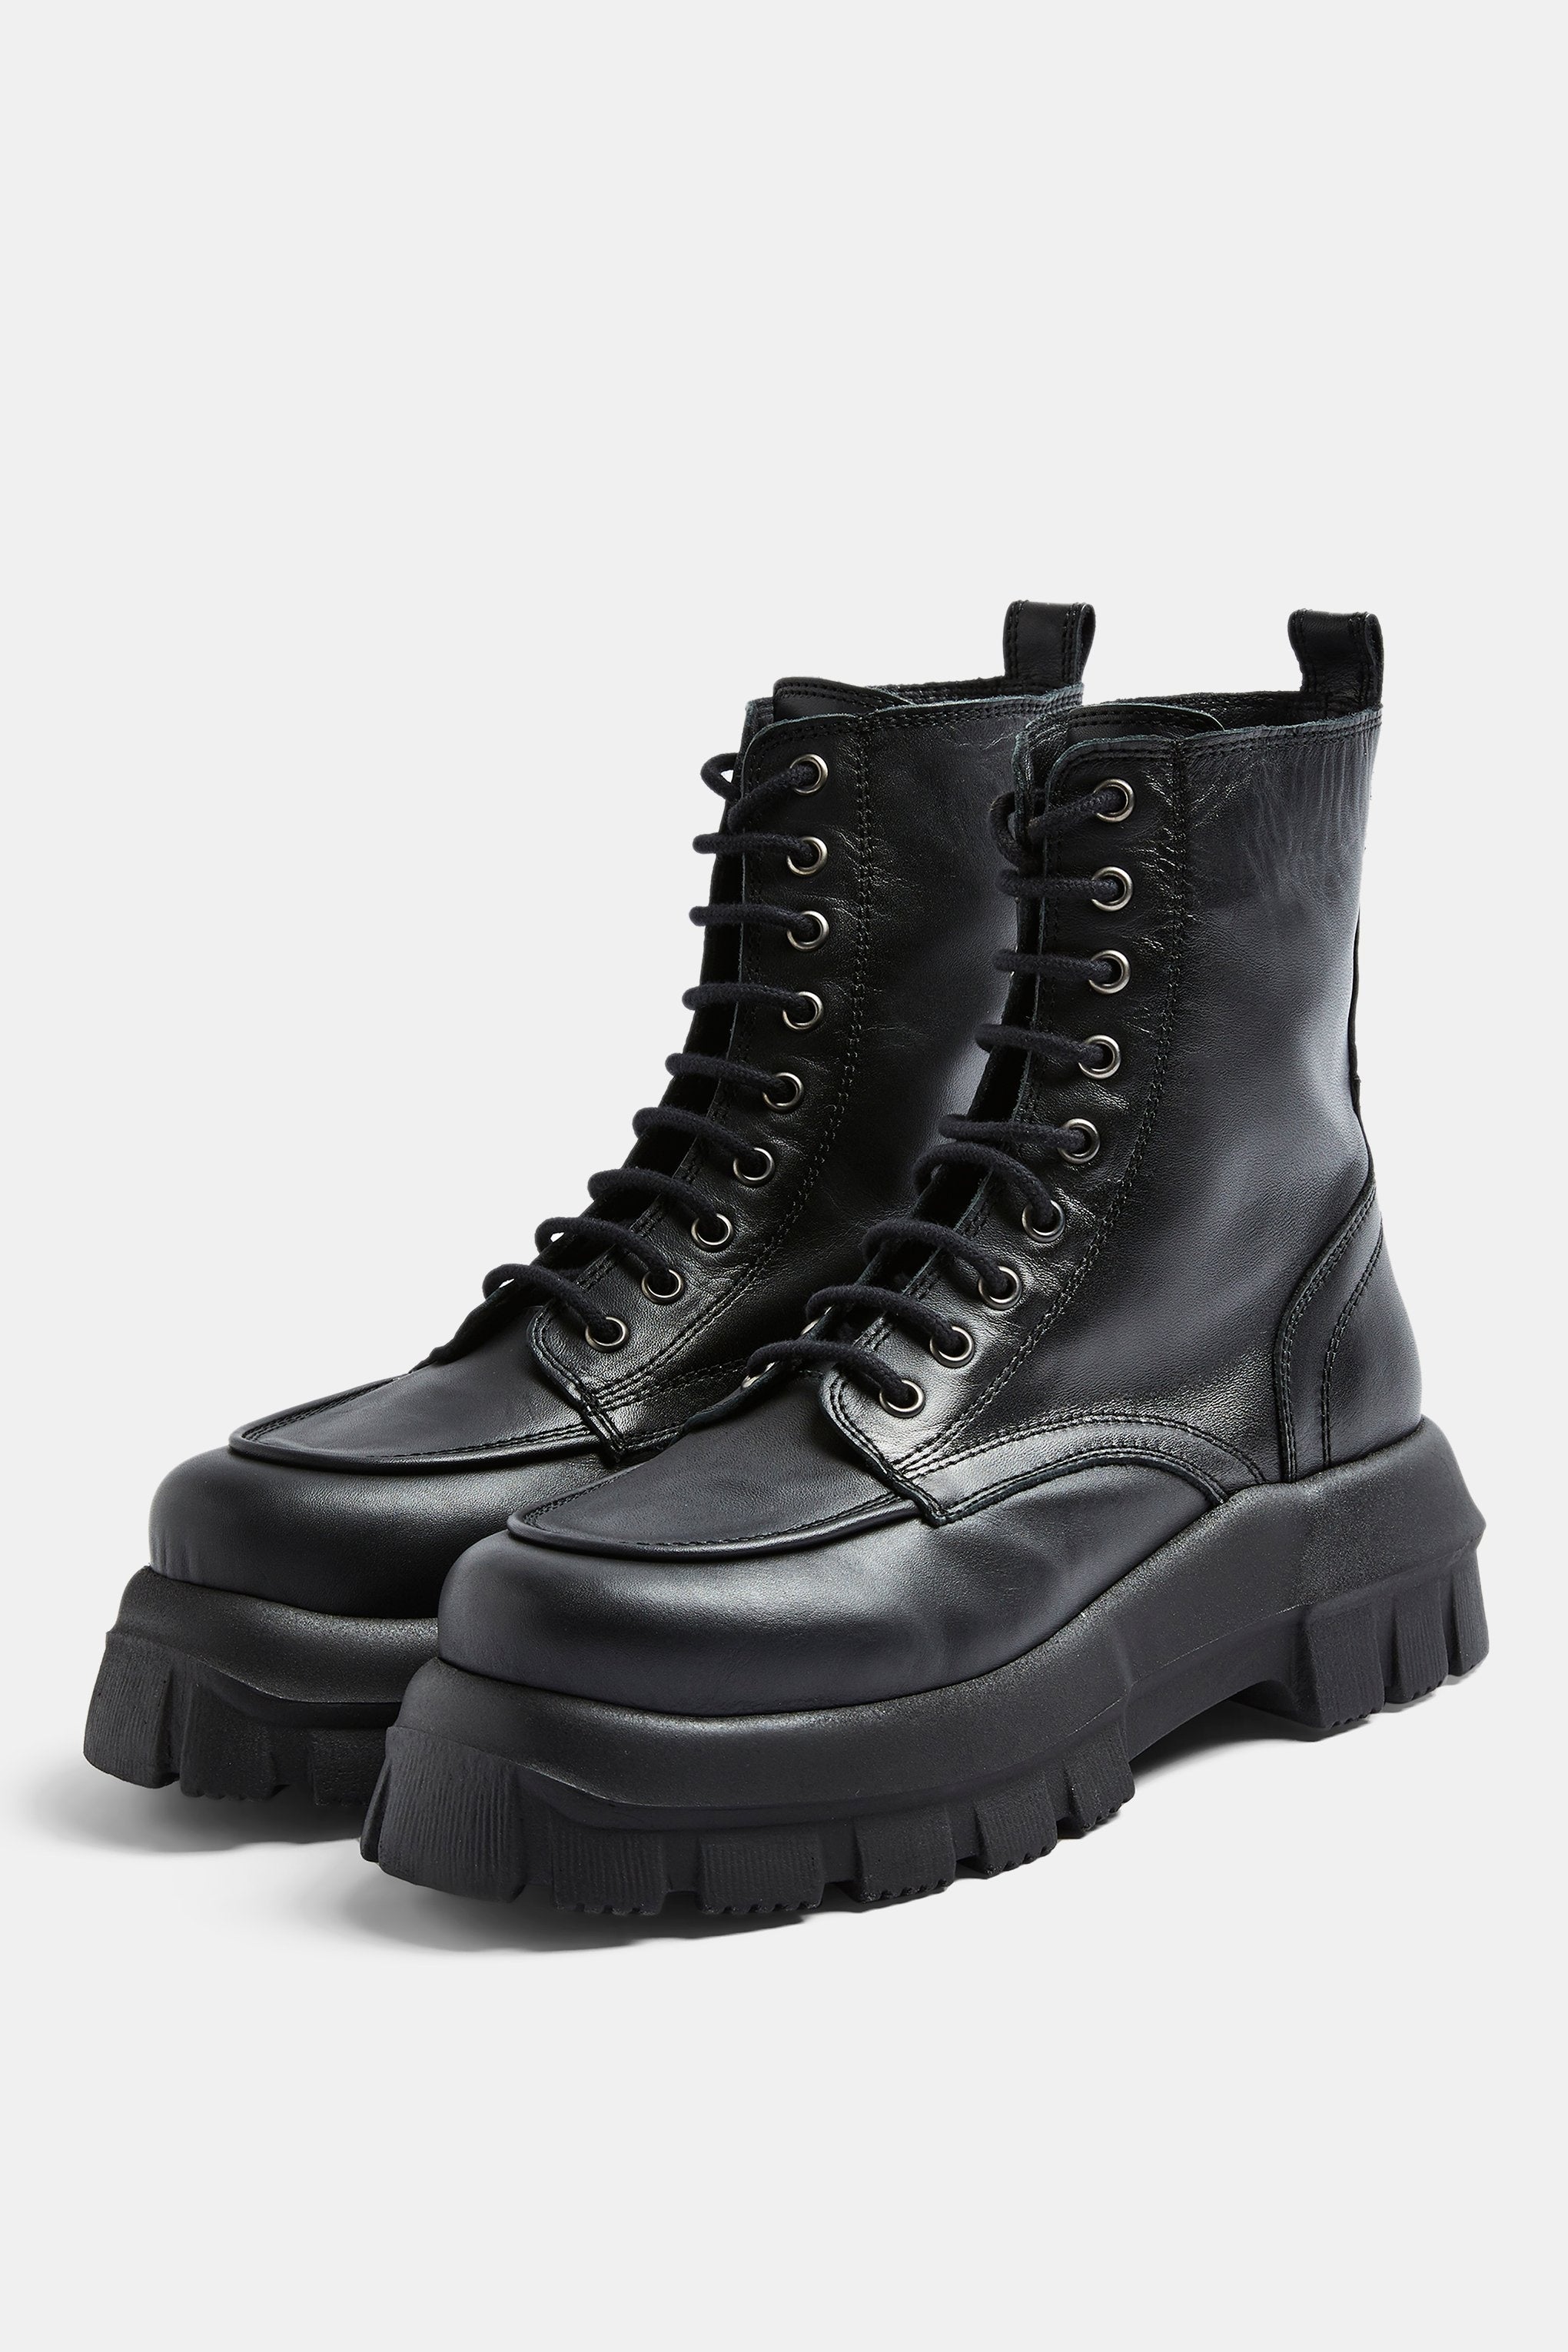 Topshop + AVA Black Leather Chunky Lace Up Boots